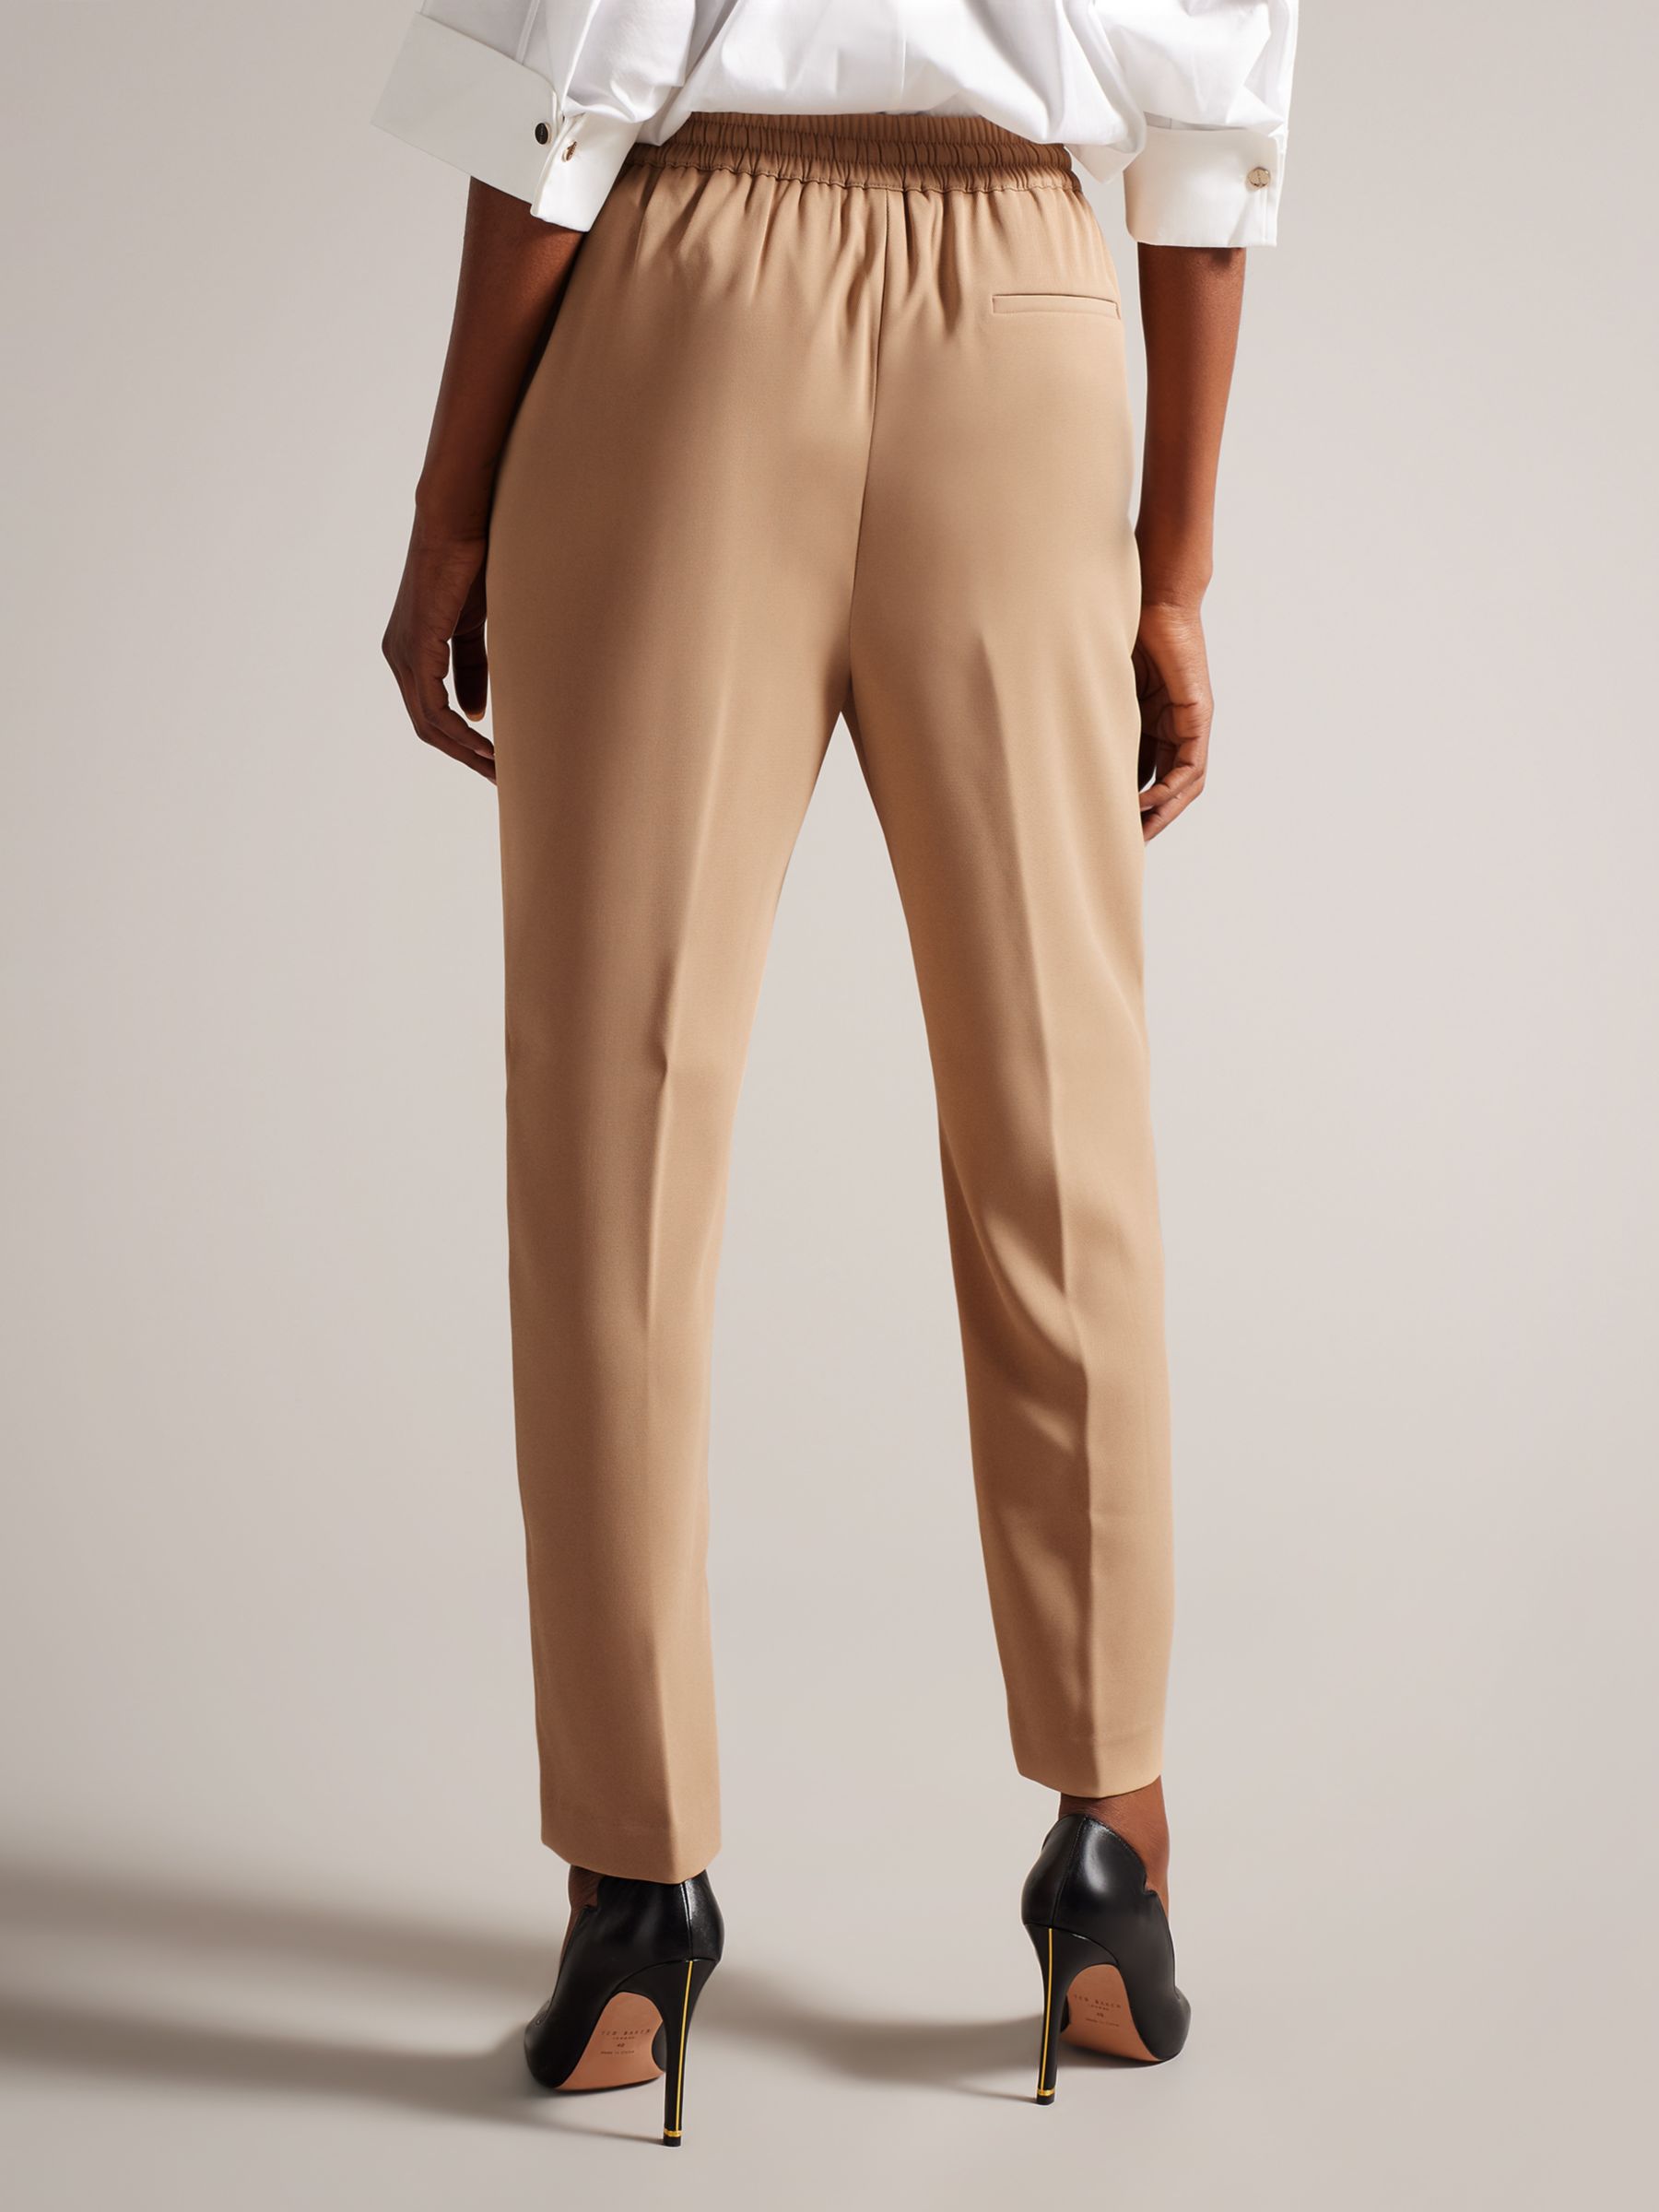 Buy Ted Baker Laurai Slim Cut Ankle Length Joggers, Brown Camel Online at johnlewis.com